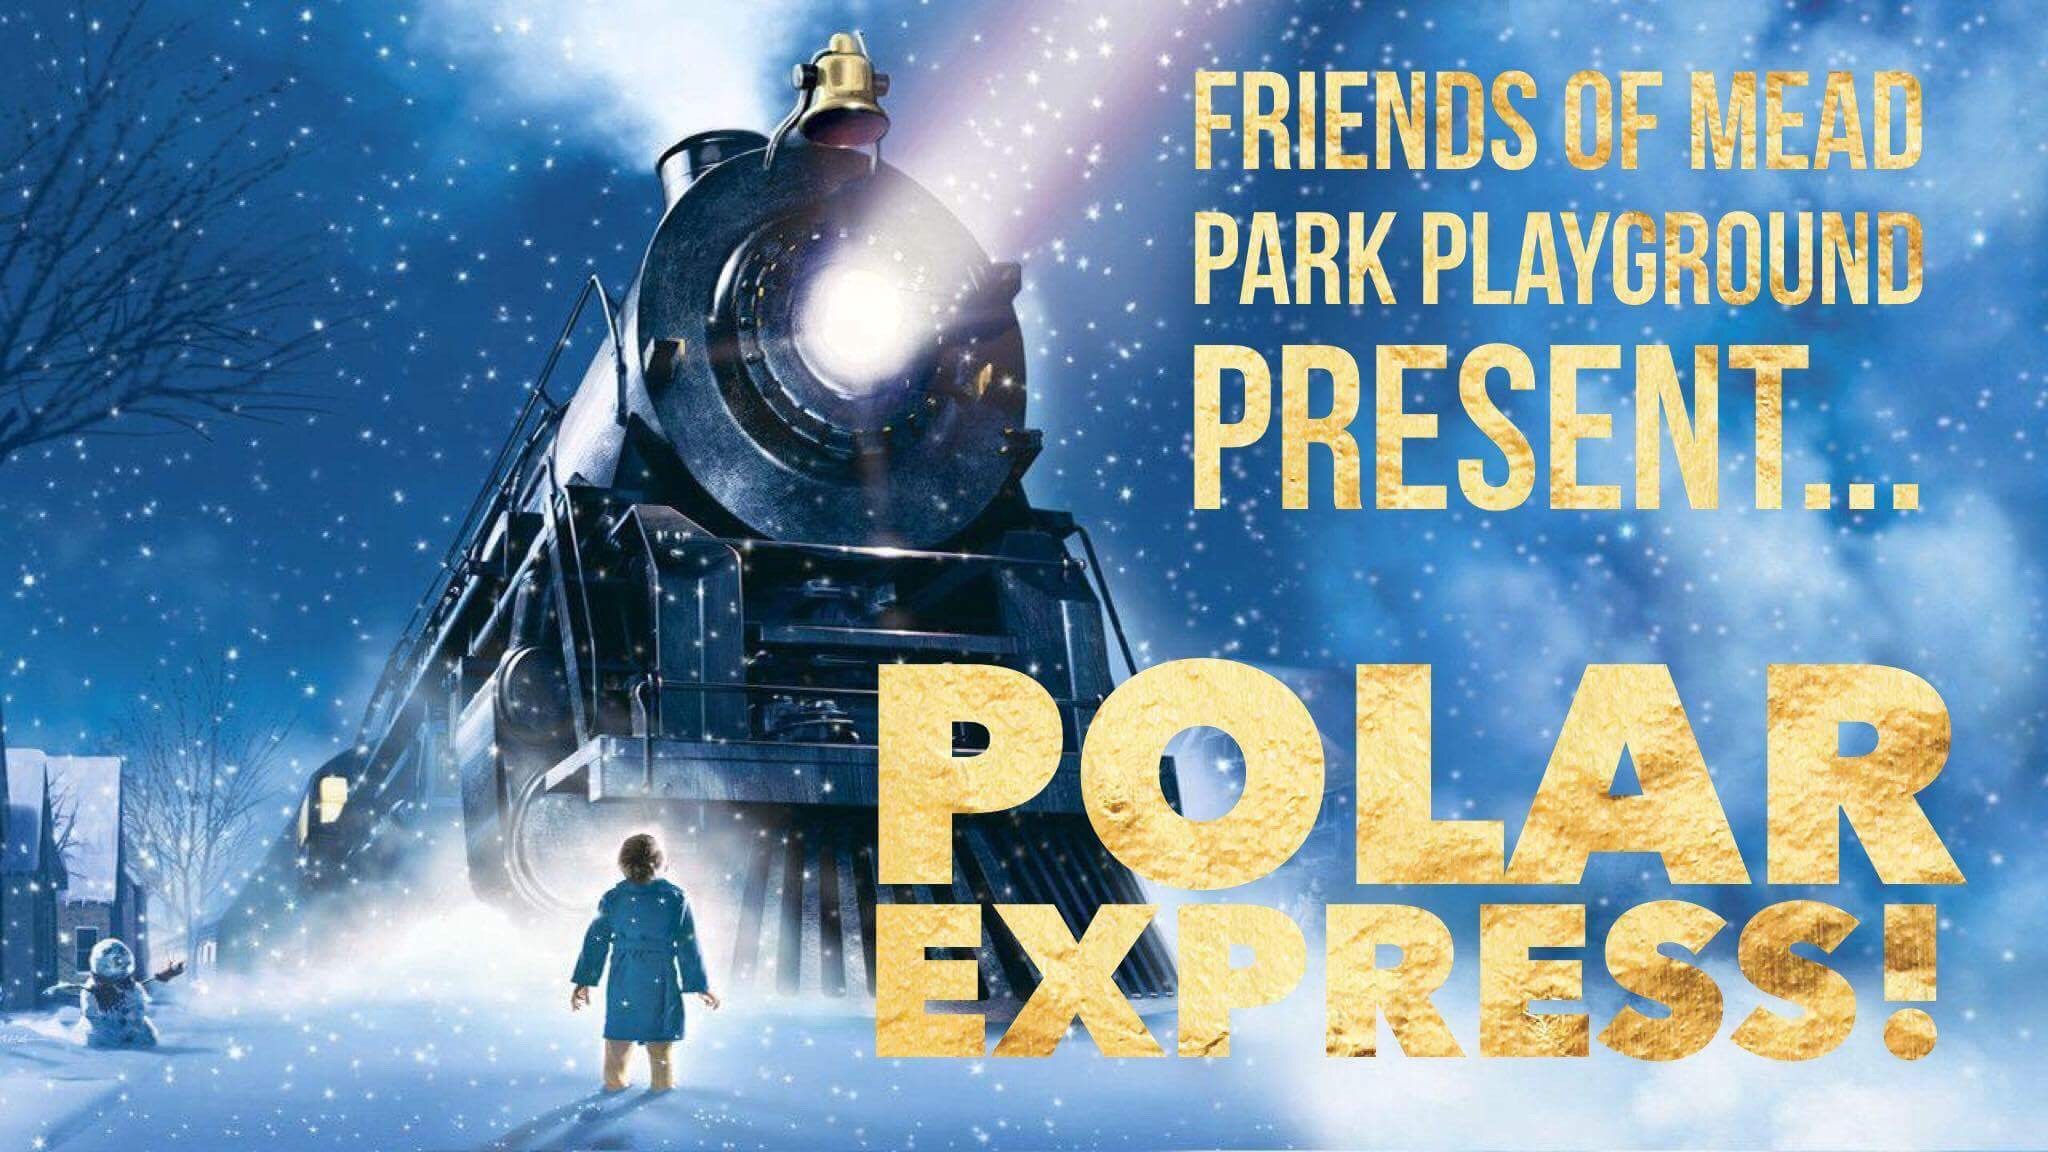 The polar express full movie download in hindi 300mb